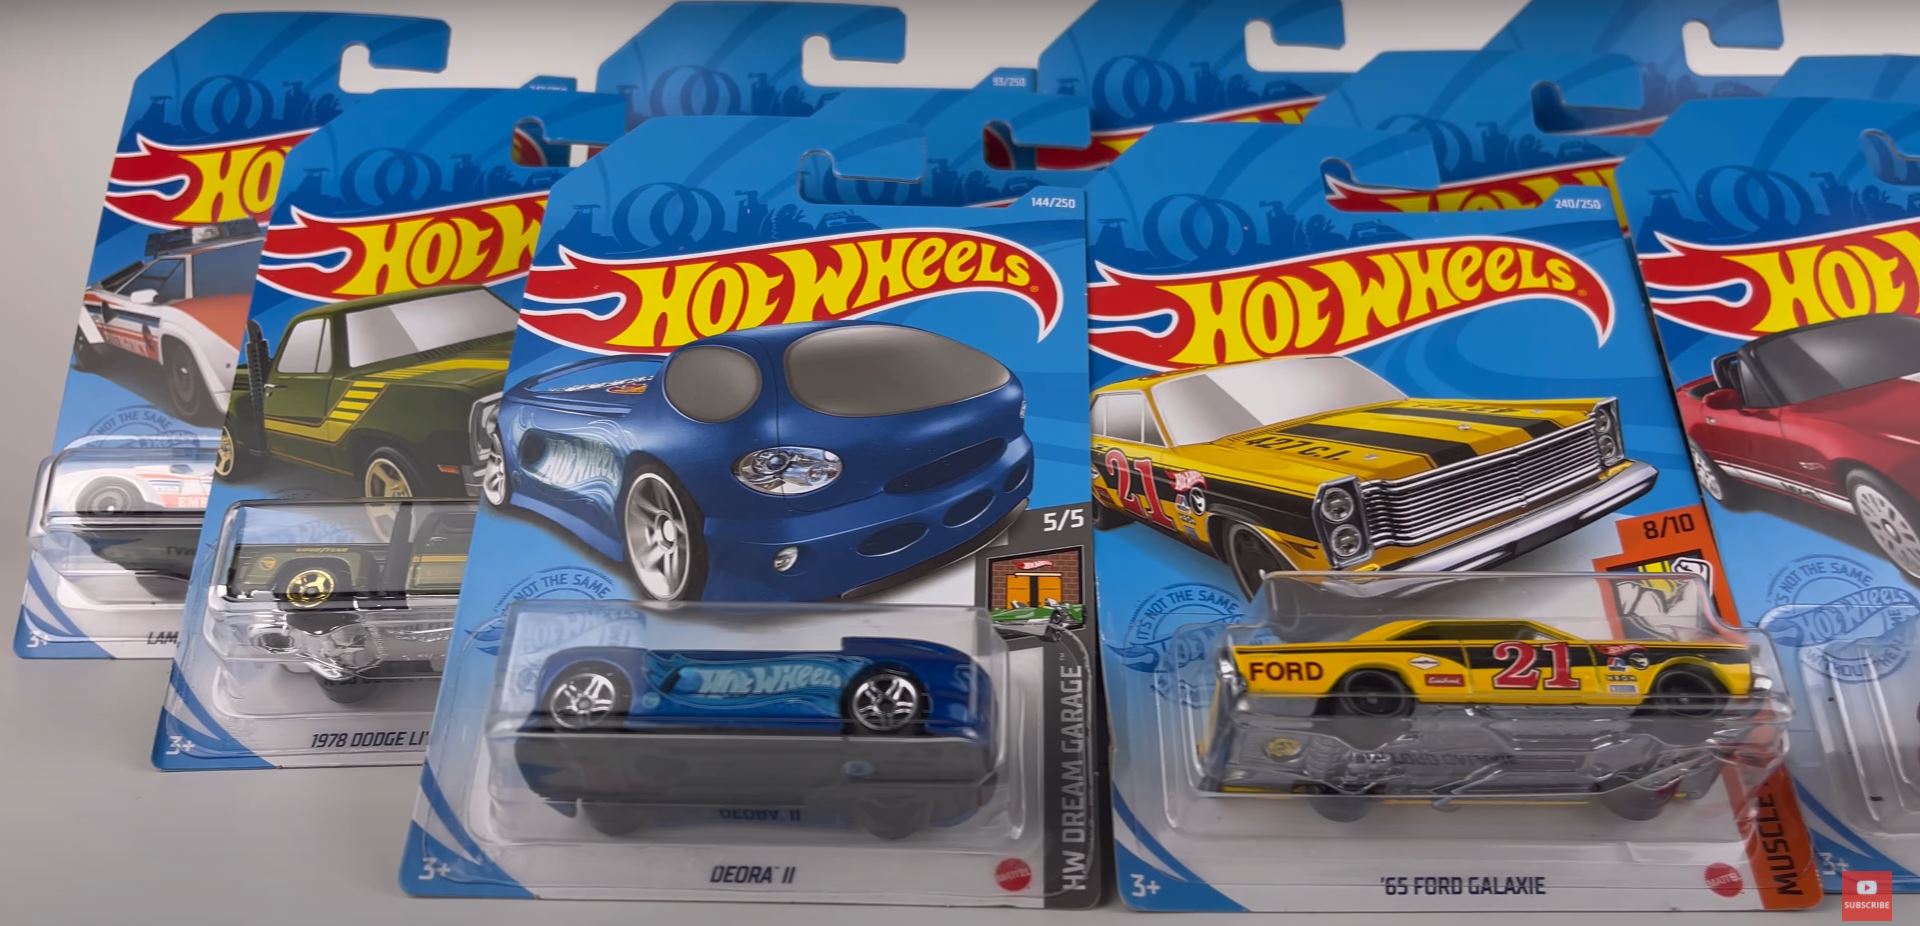 Hot Wheels 10 cars and carrying case (Rare) - collectibles - by